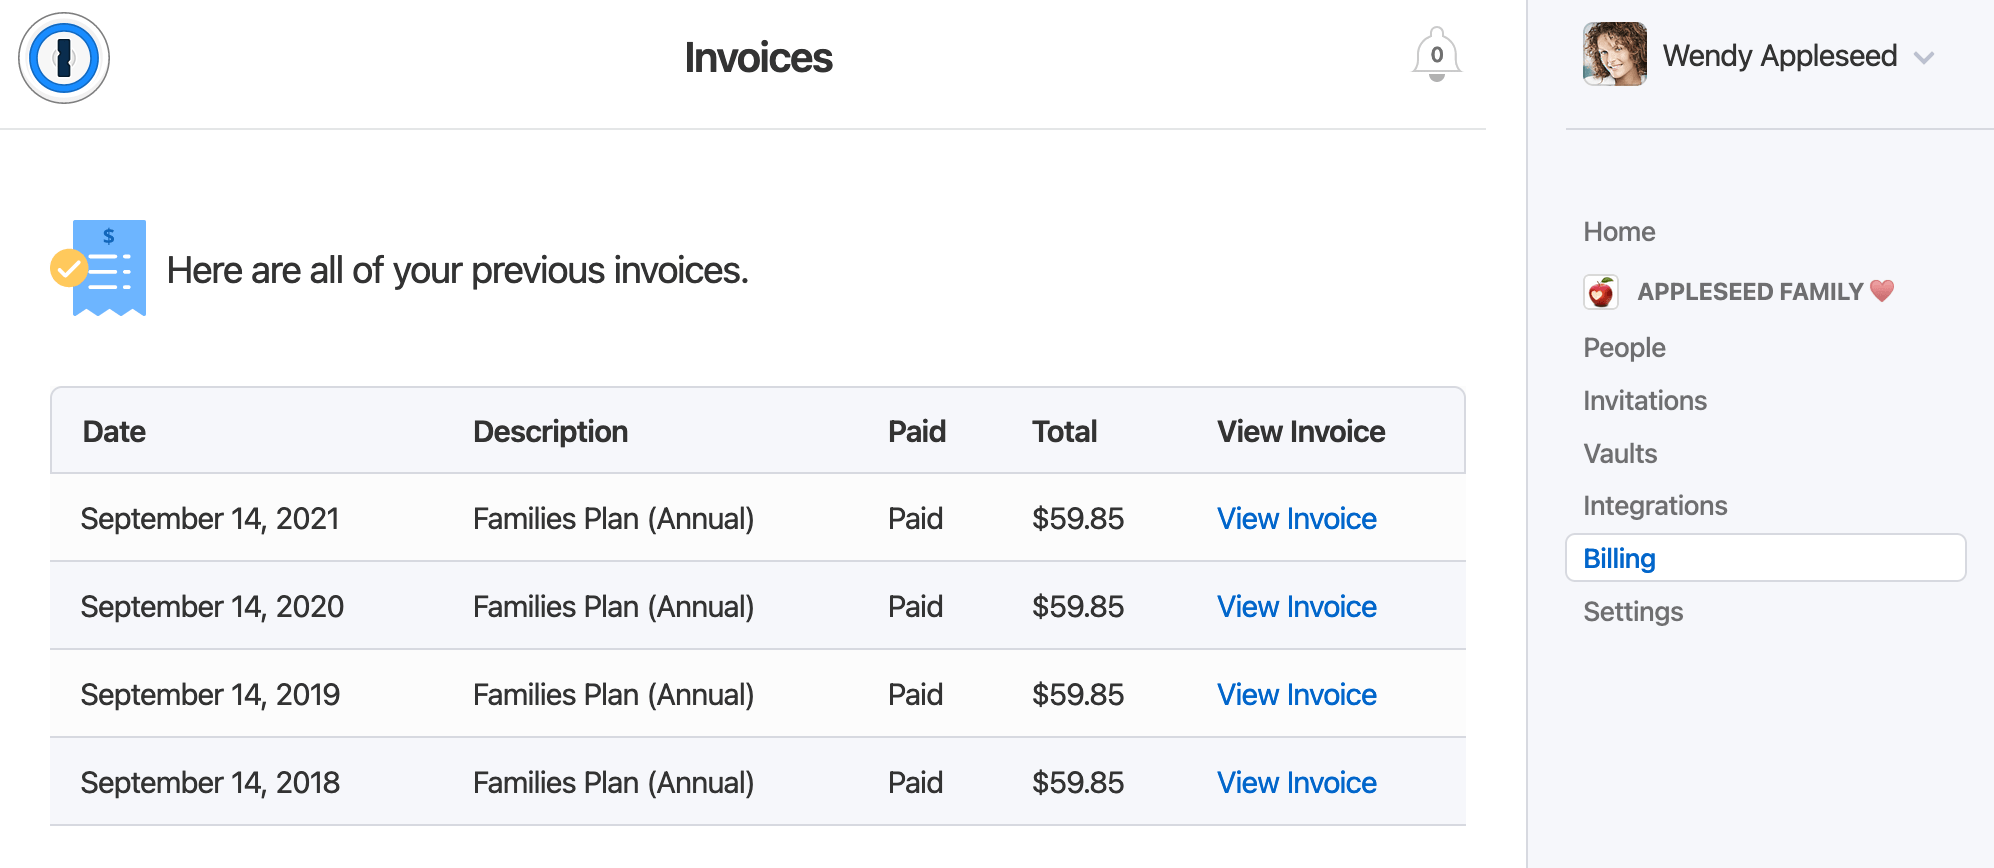 Invoices page showing a list of previous invoices